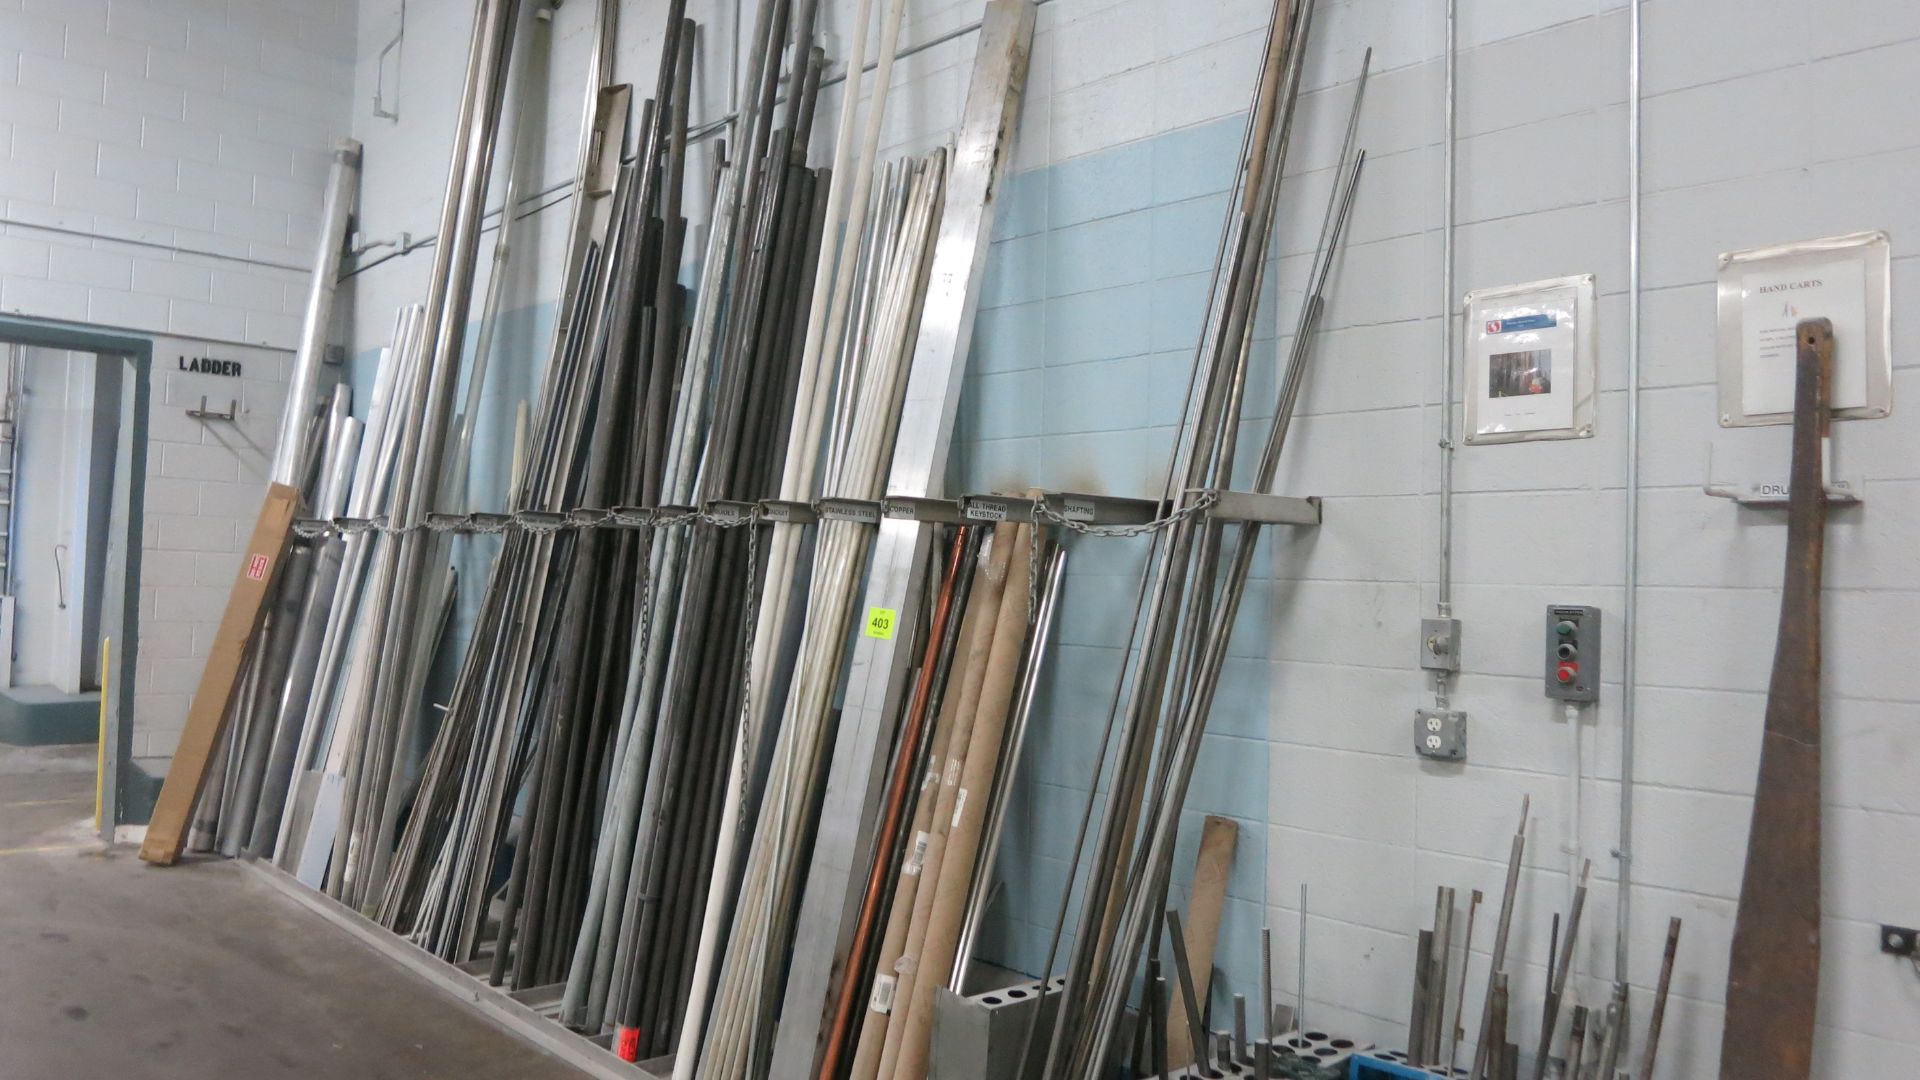 [Lot] Miscellaneous pipes, tubings, rods/stocks , stainless, aluminum, carbon steel, pvc, from